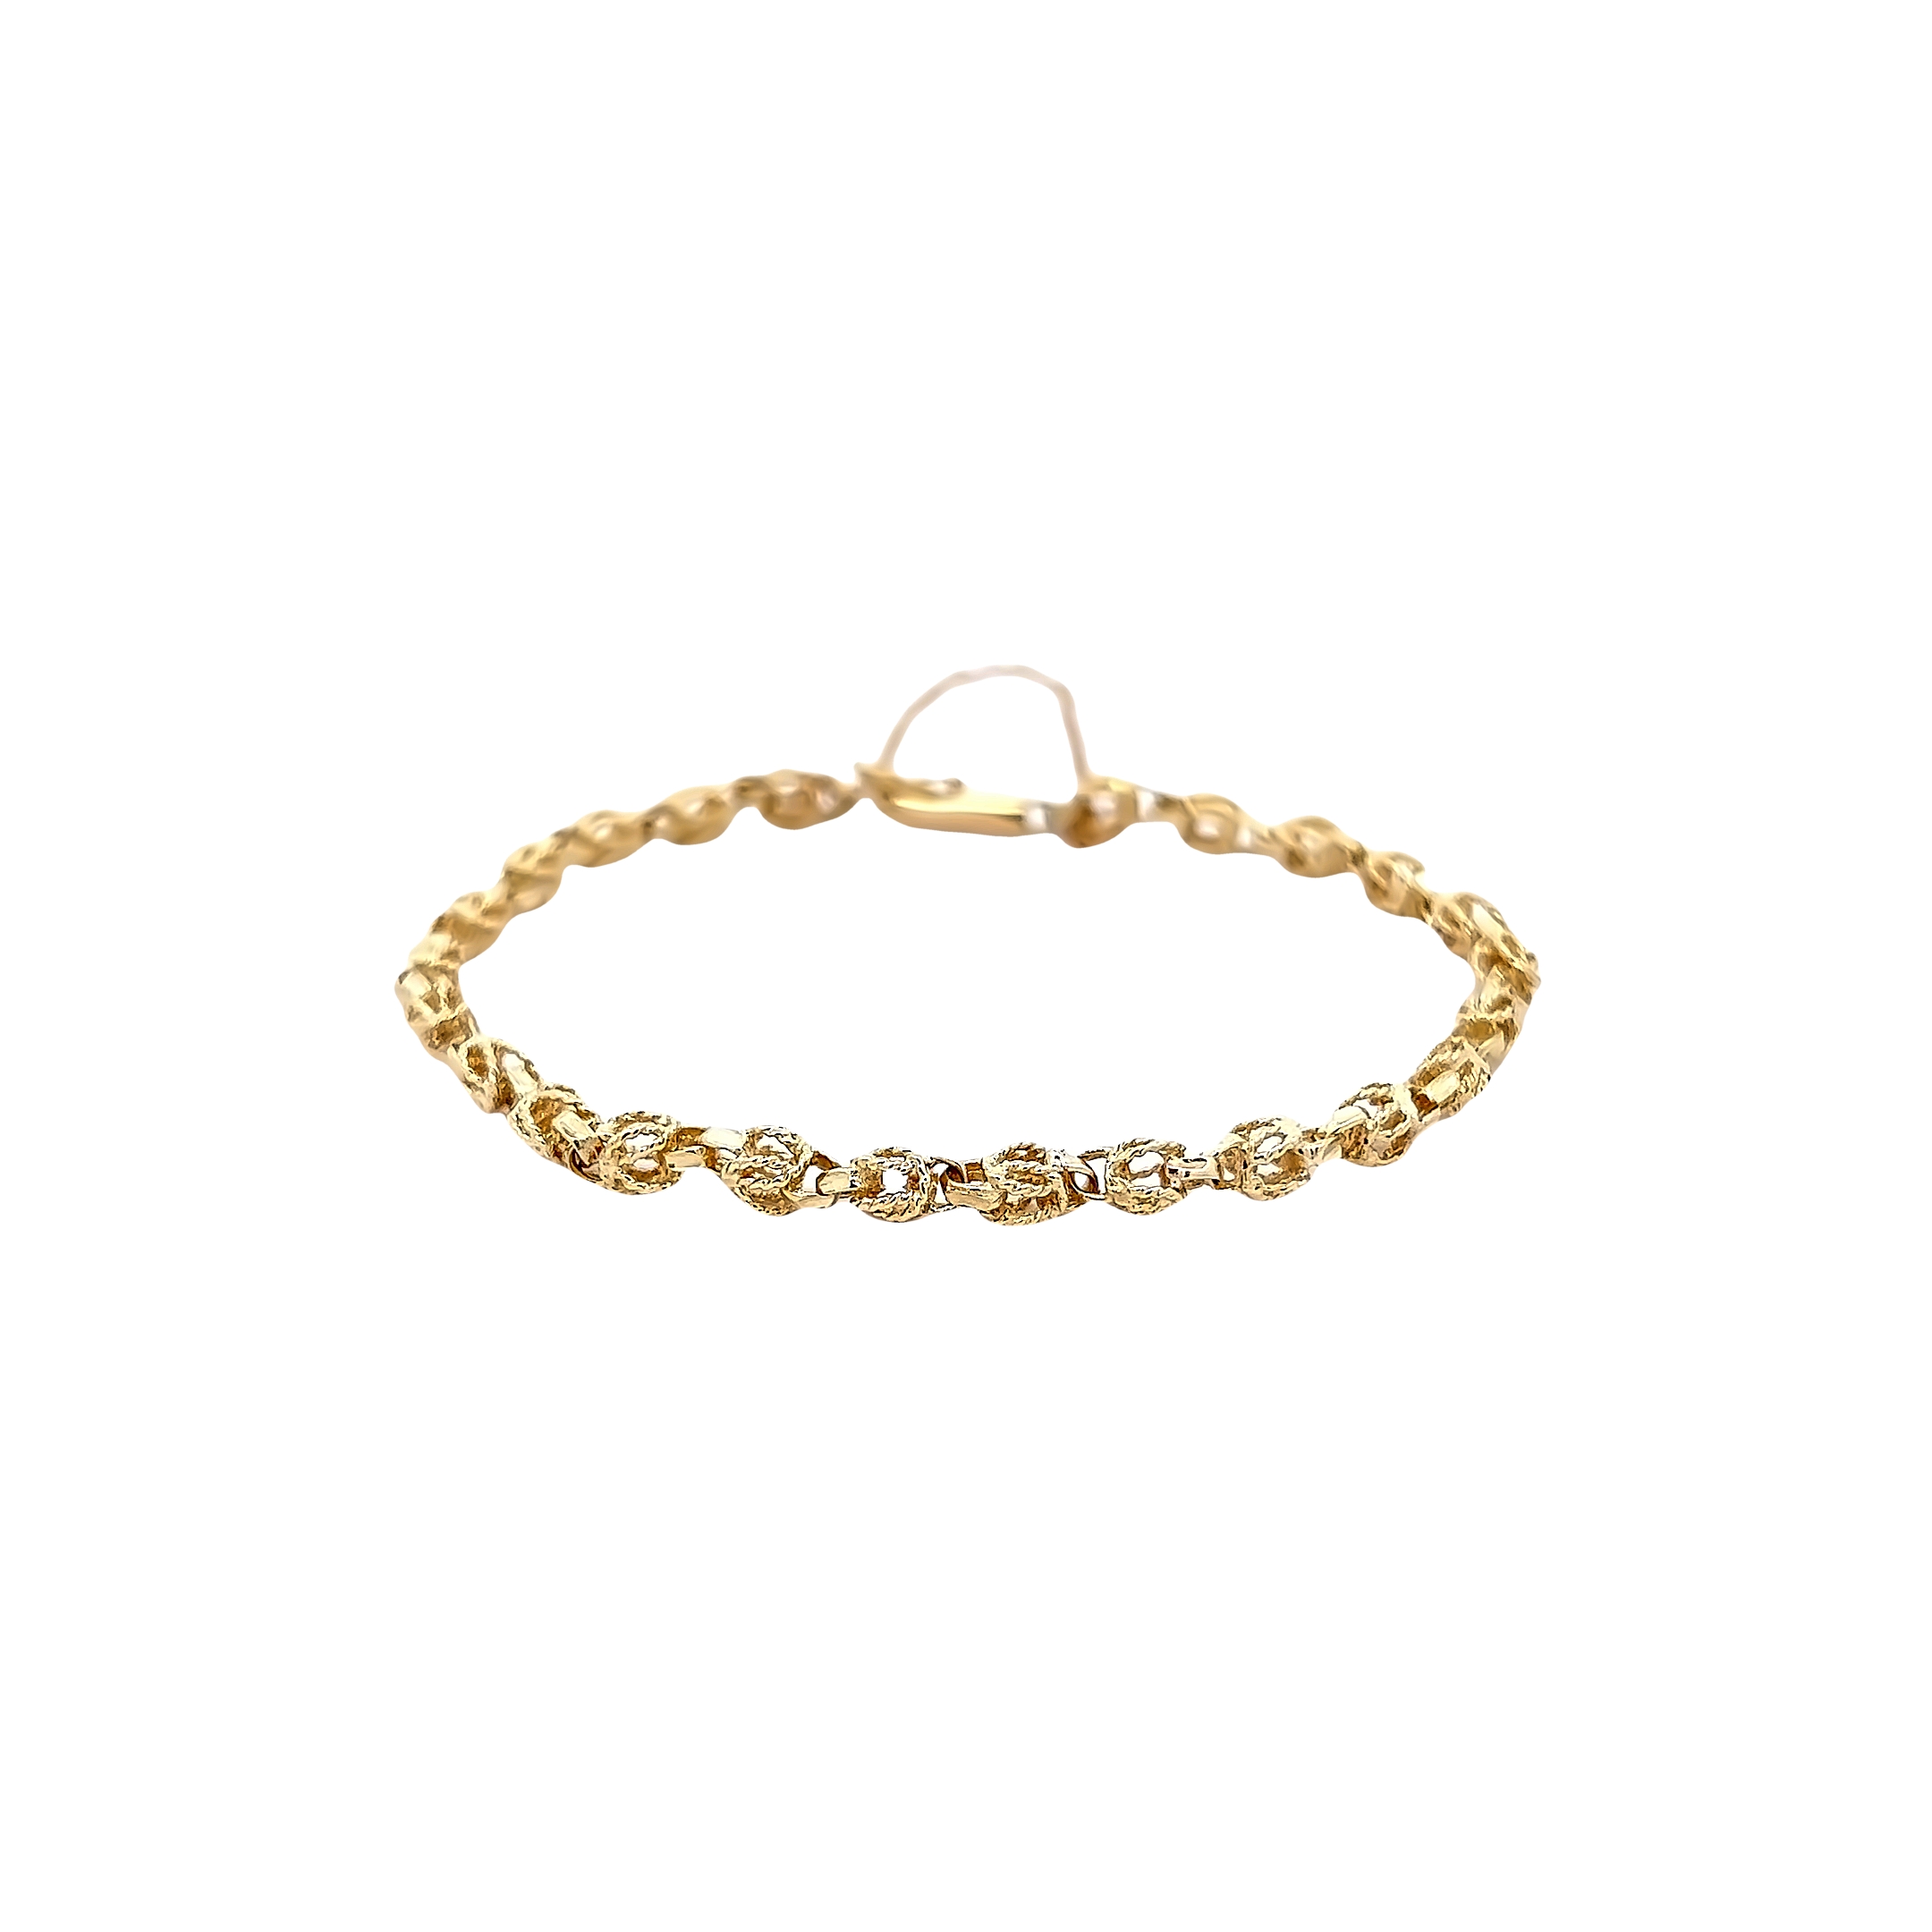 14 karat yellow gold bracelet with saftey chain. Length 7"